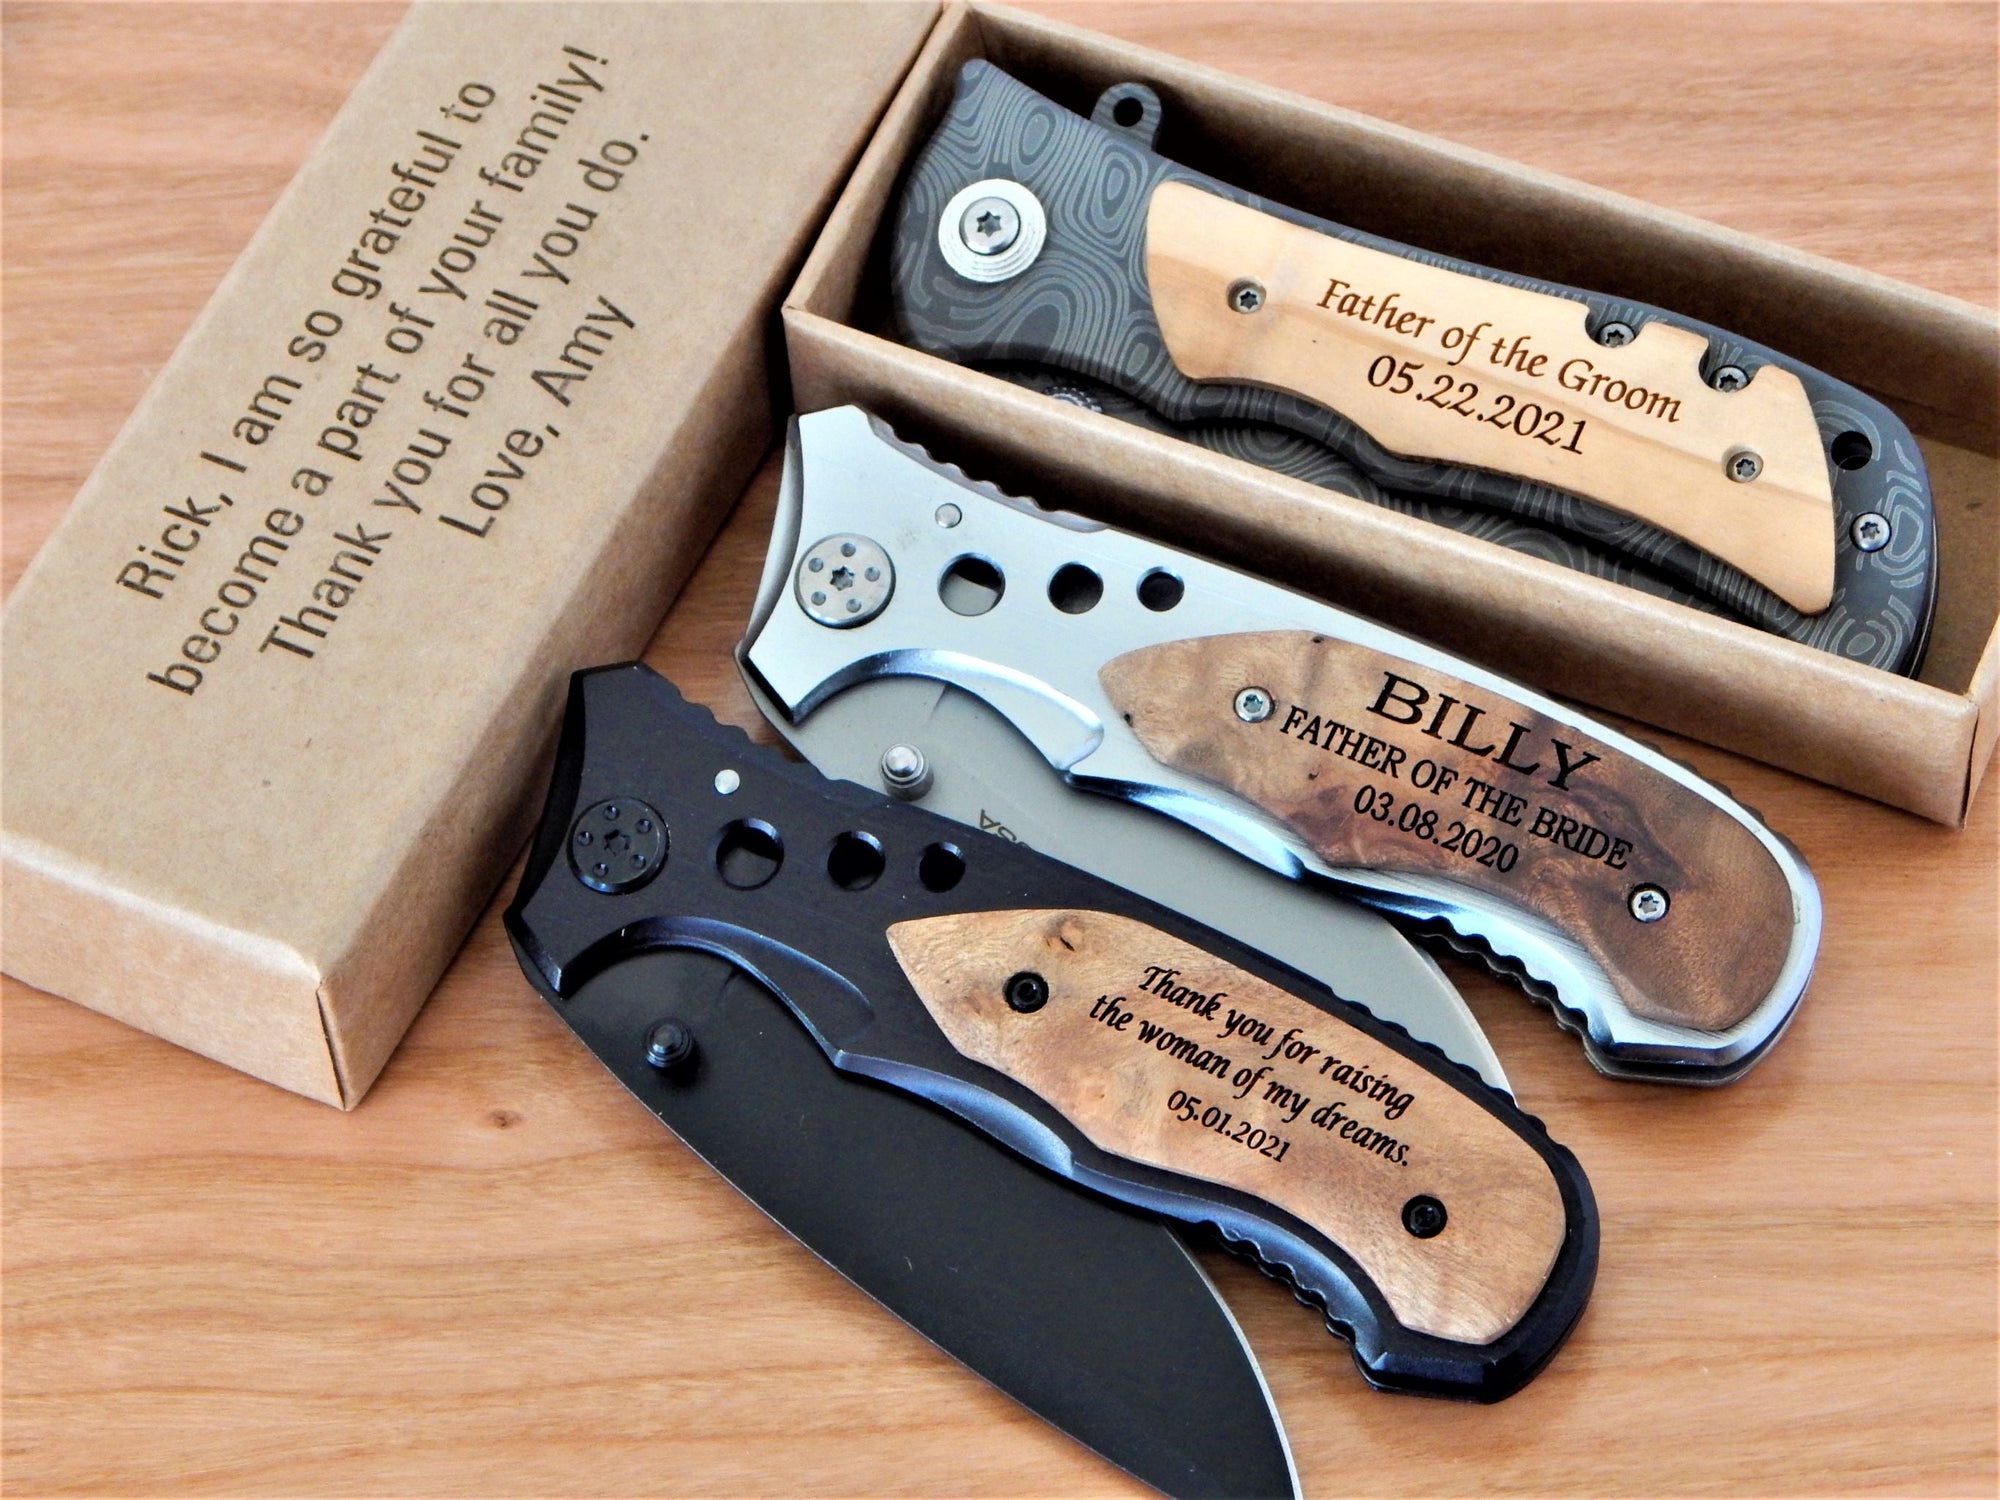 Stepfather of the Bride Gift | Engraved Groomsmen Knives